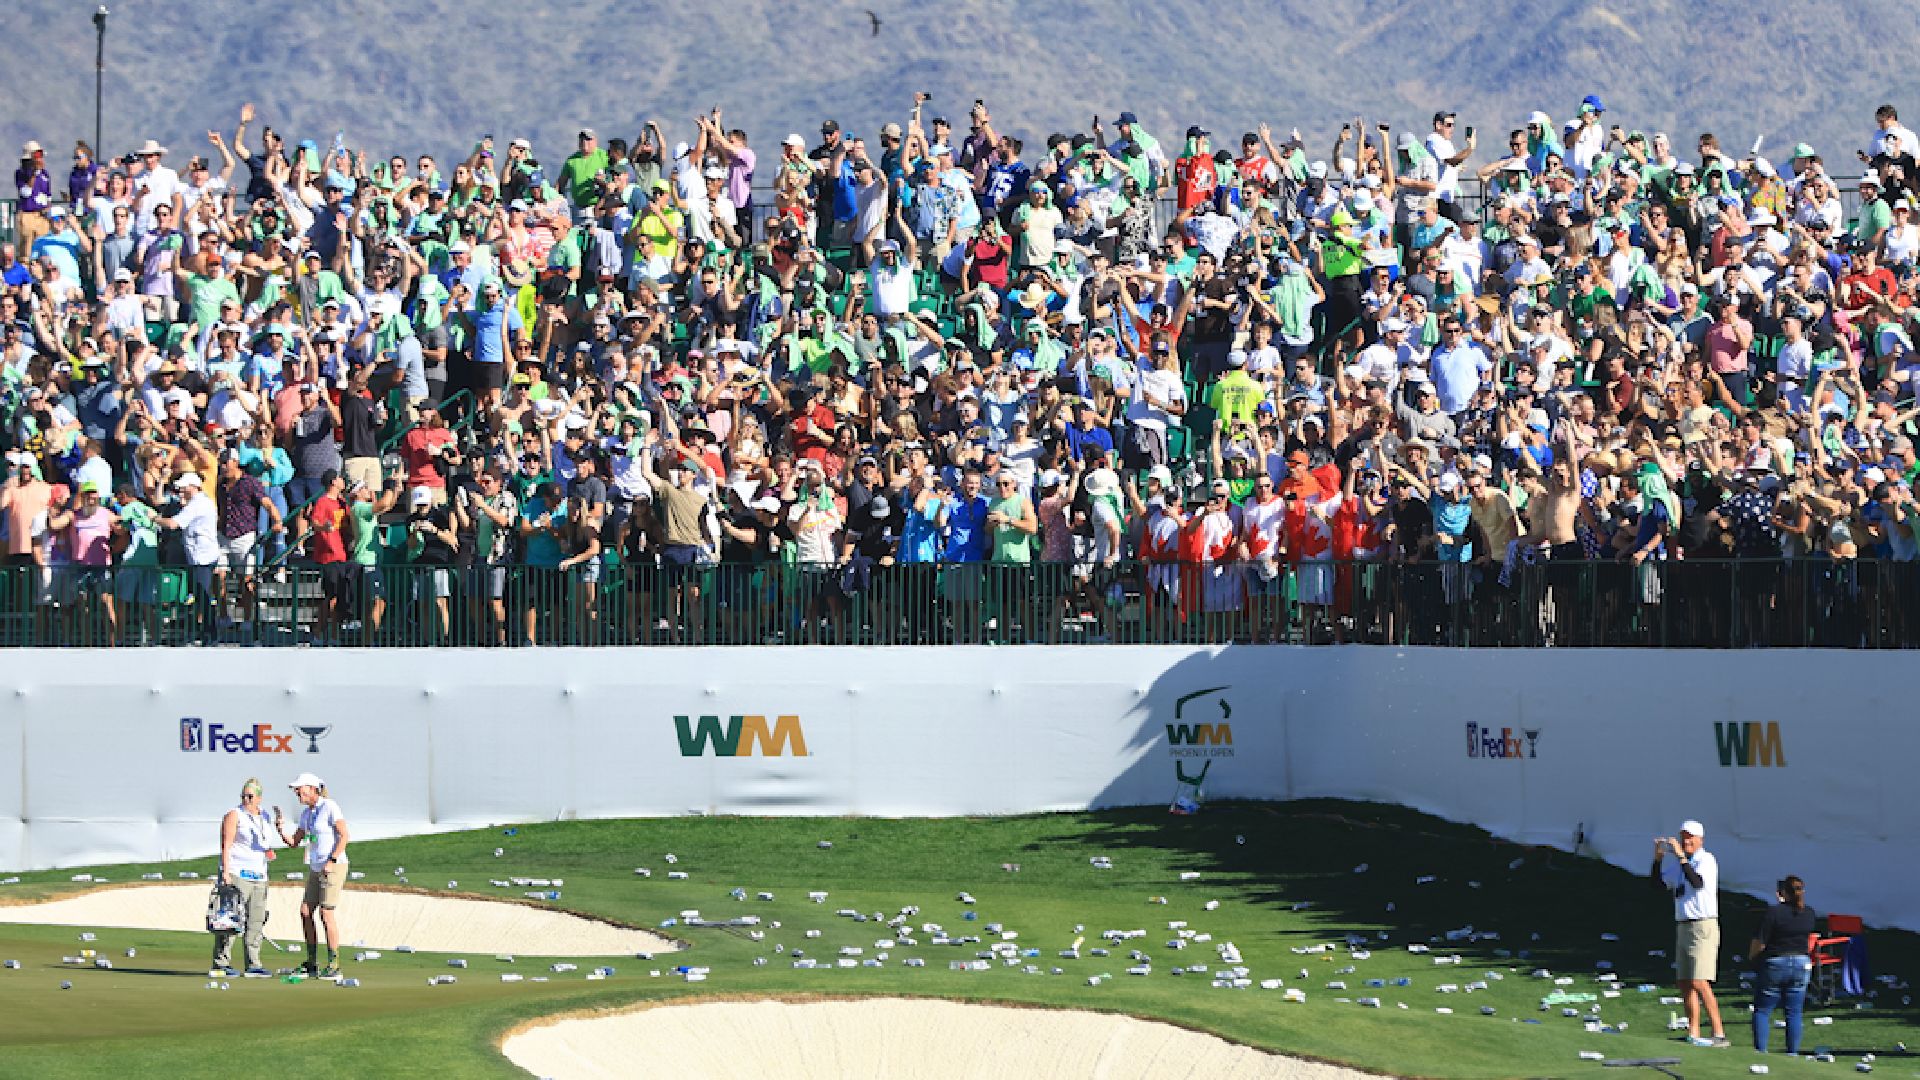 The world's best golfers take on the PGA Tour's biggest stage at the WM Phoenix Open